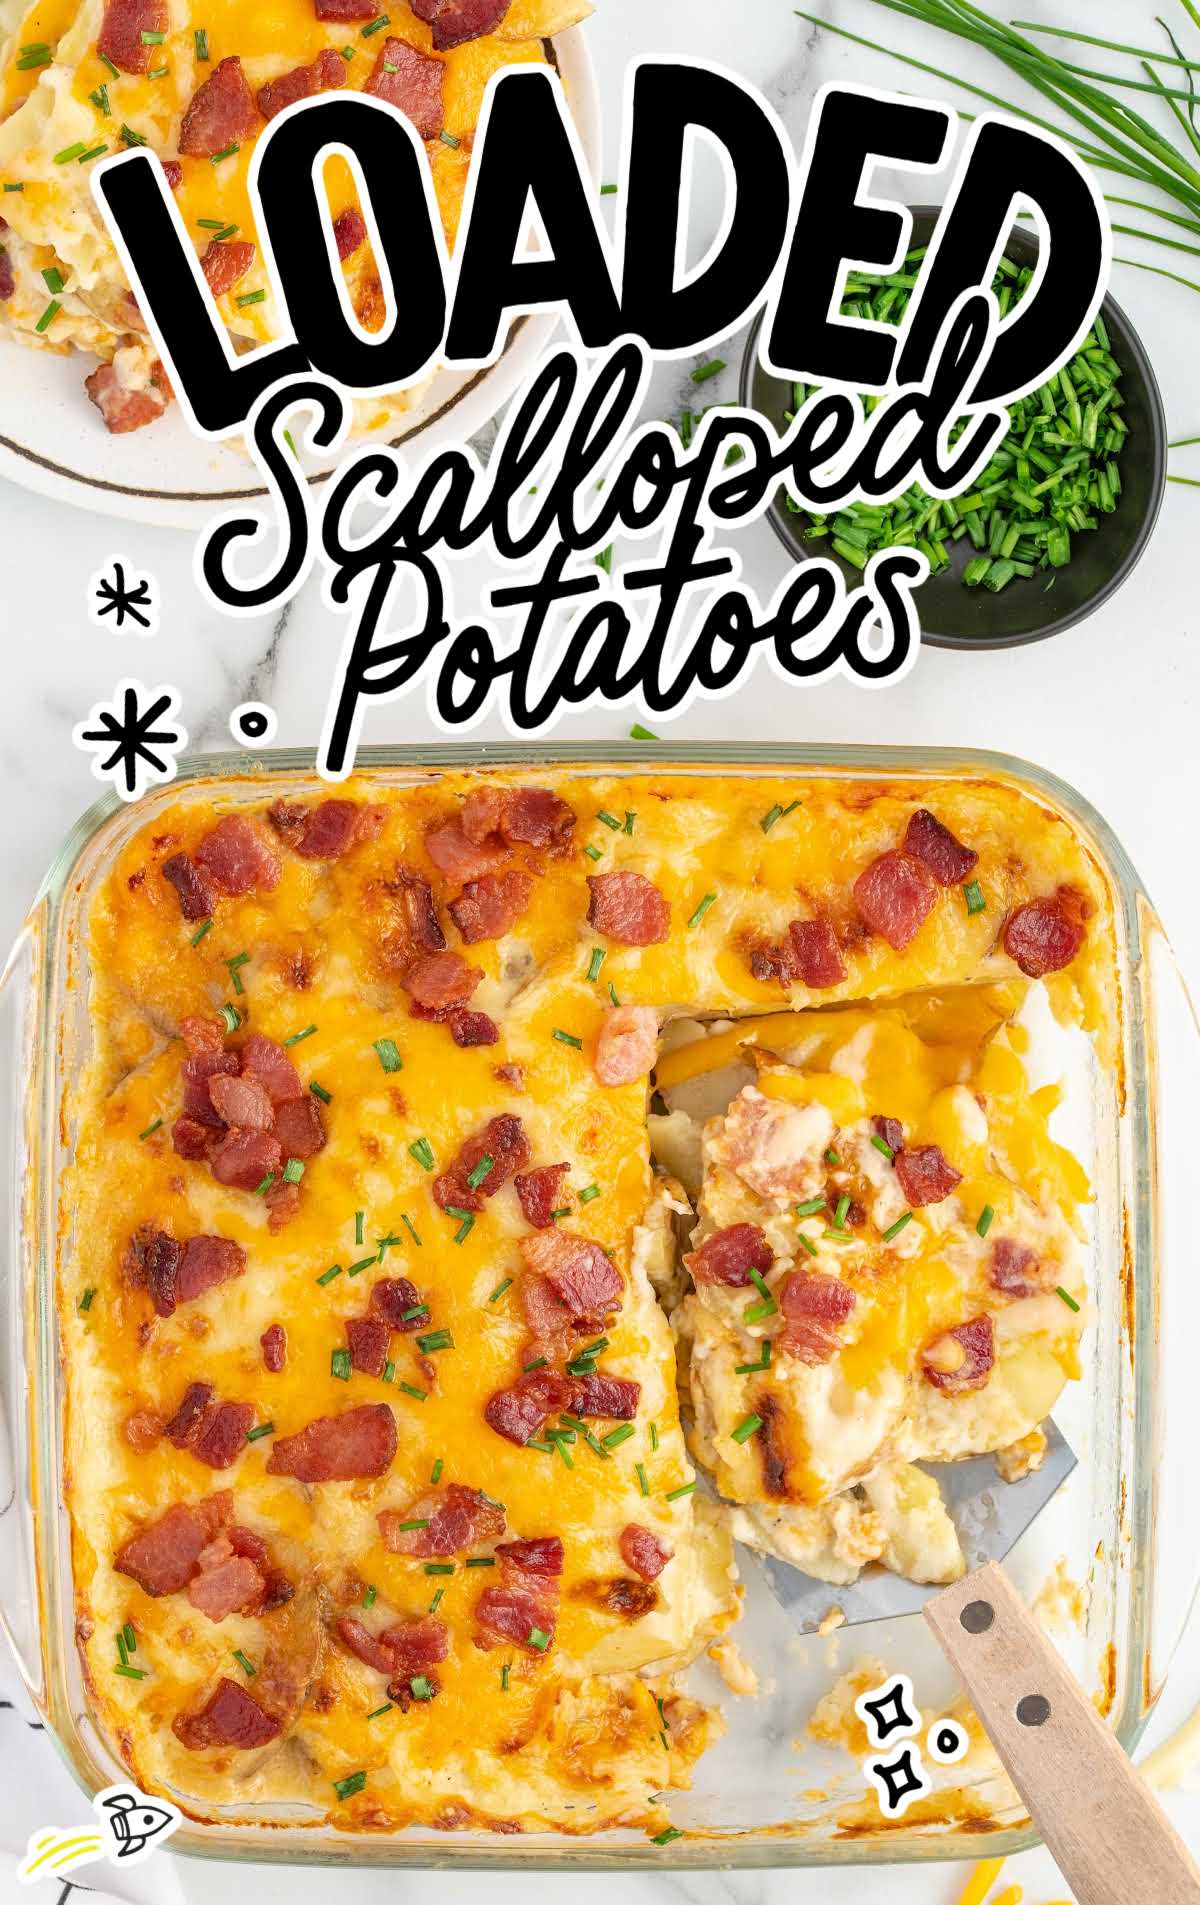 Loaded Scalloped Potatoes in a baking dish